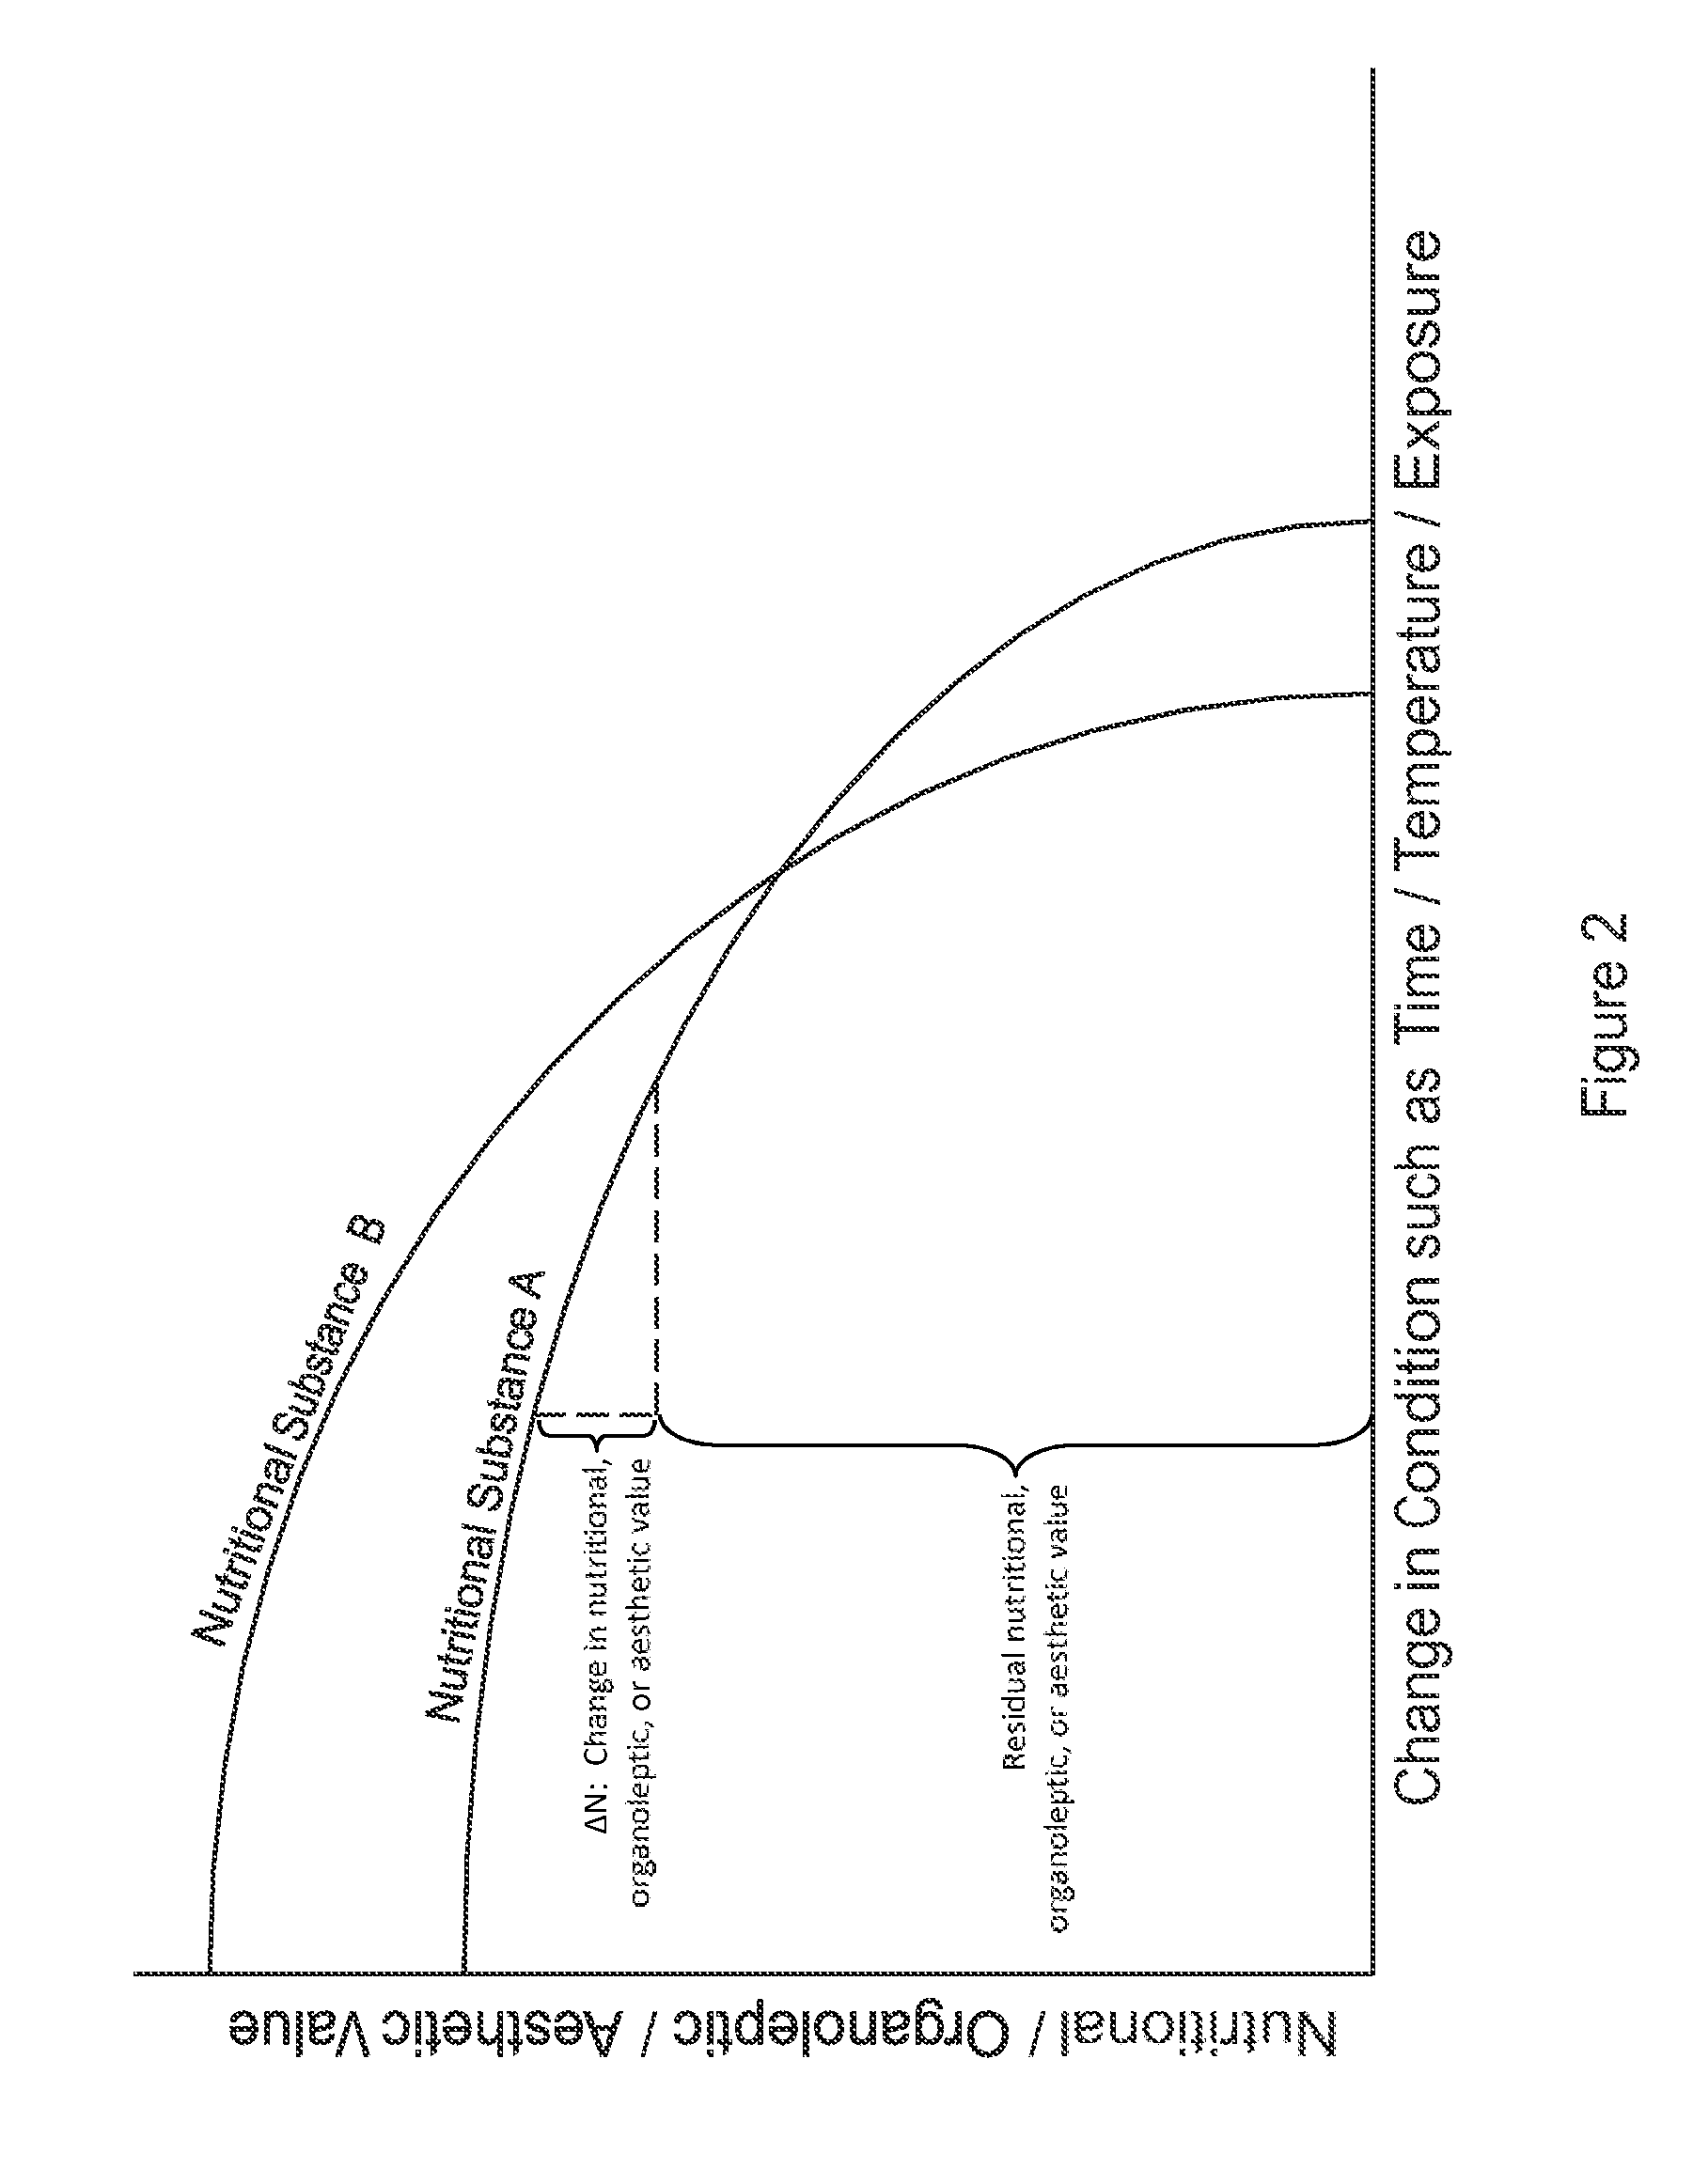 System for managing the nutritional content for nutritional substances